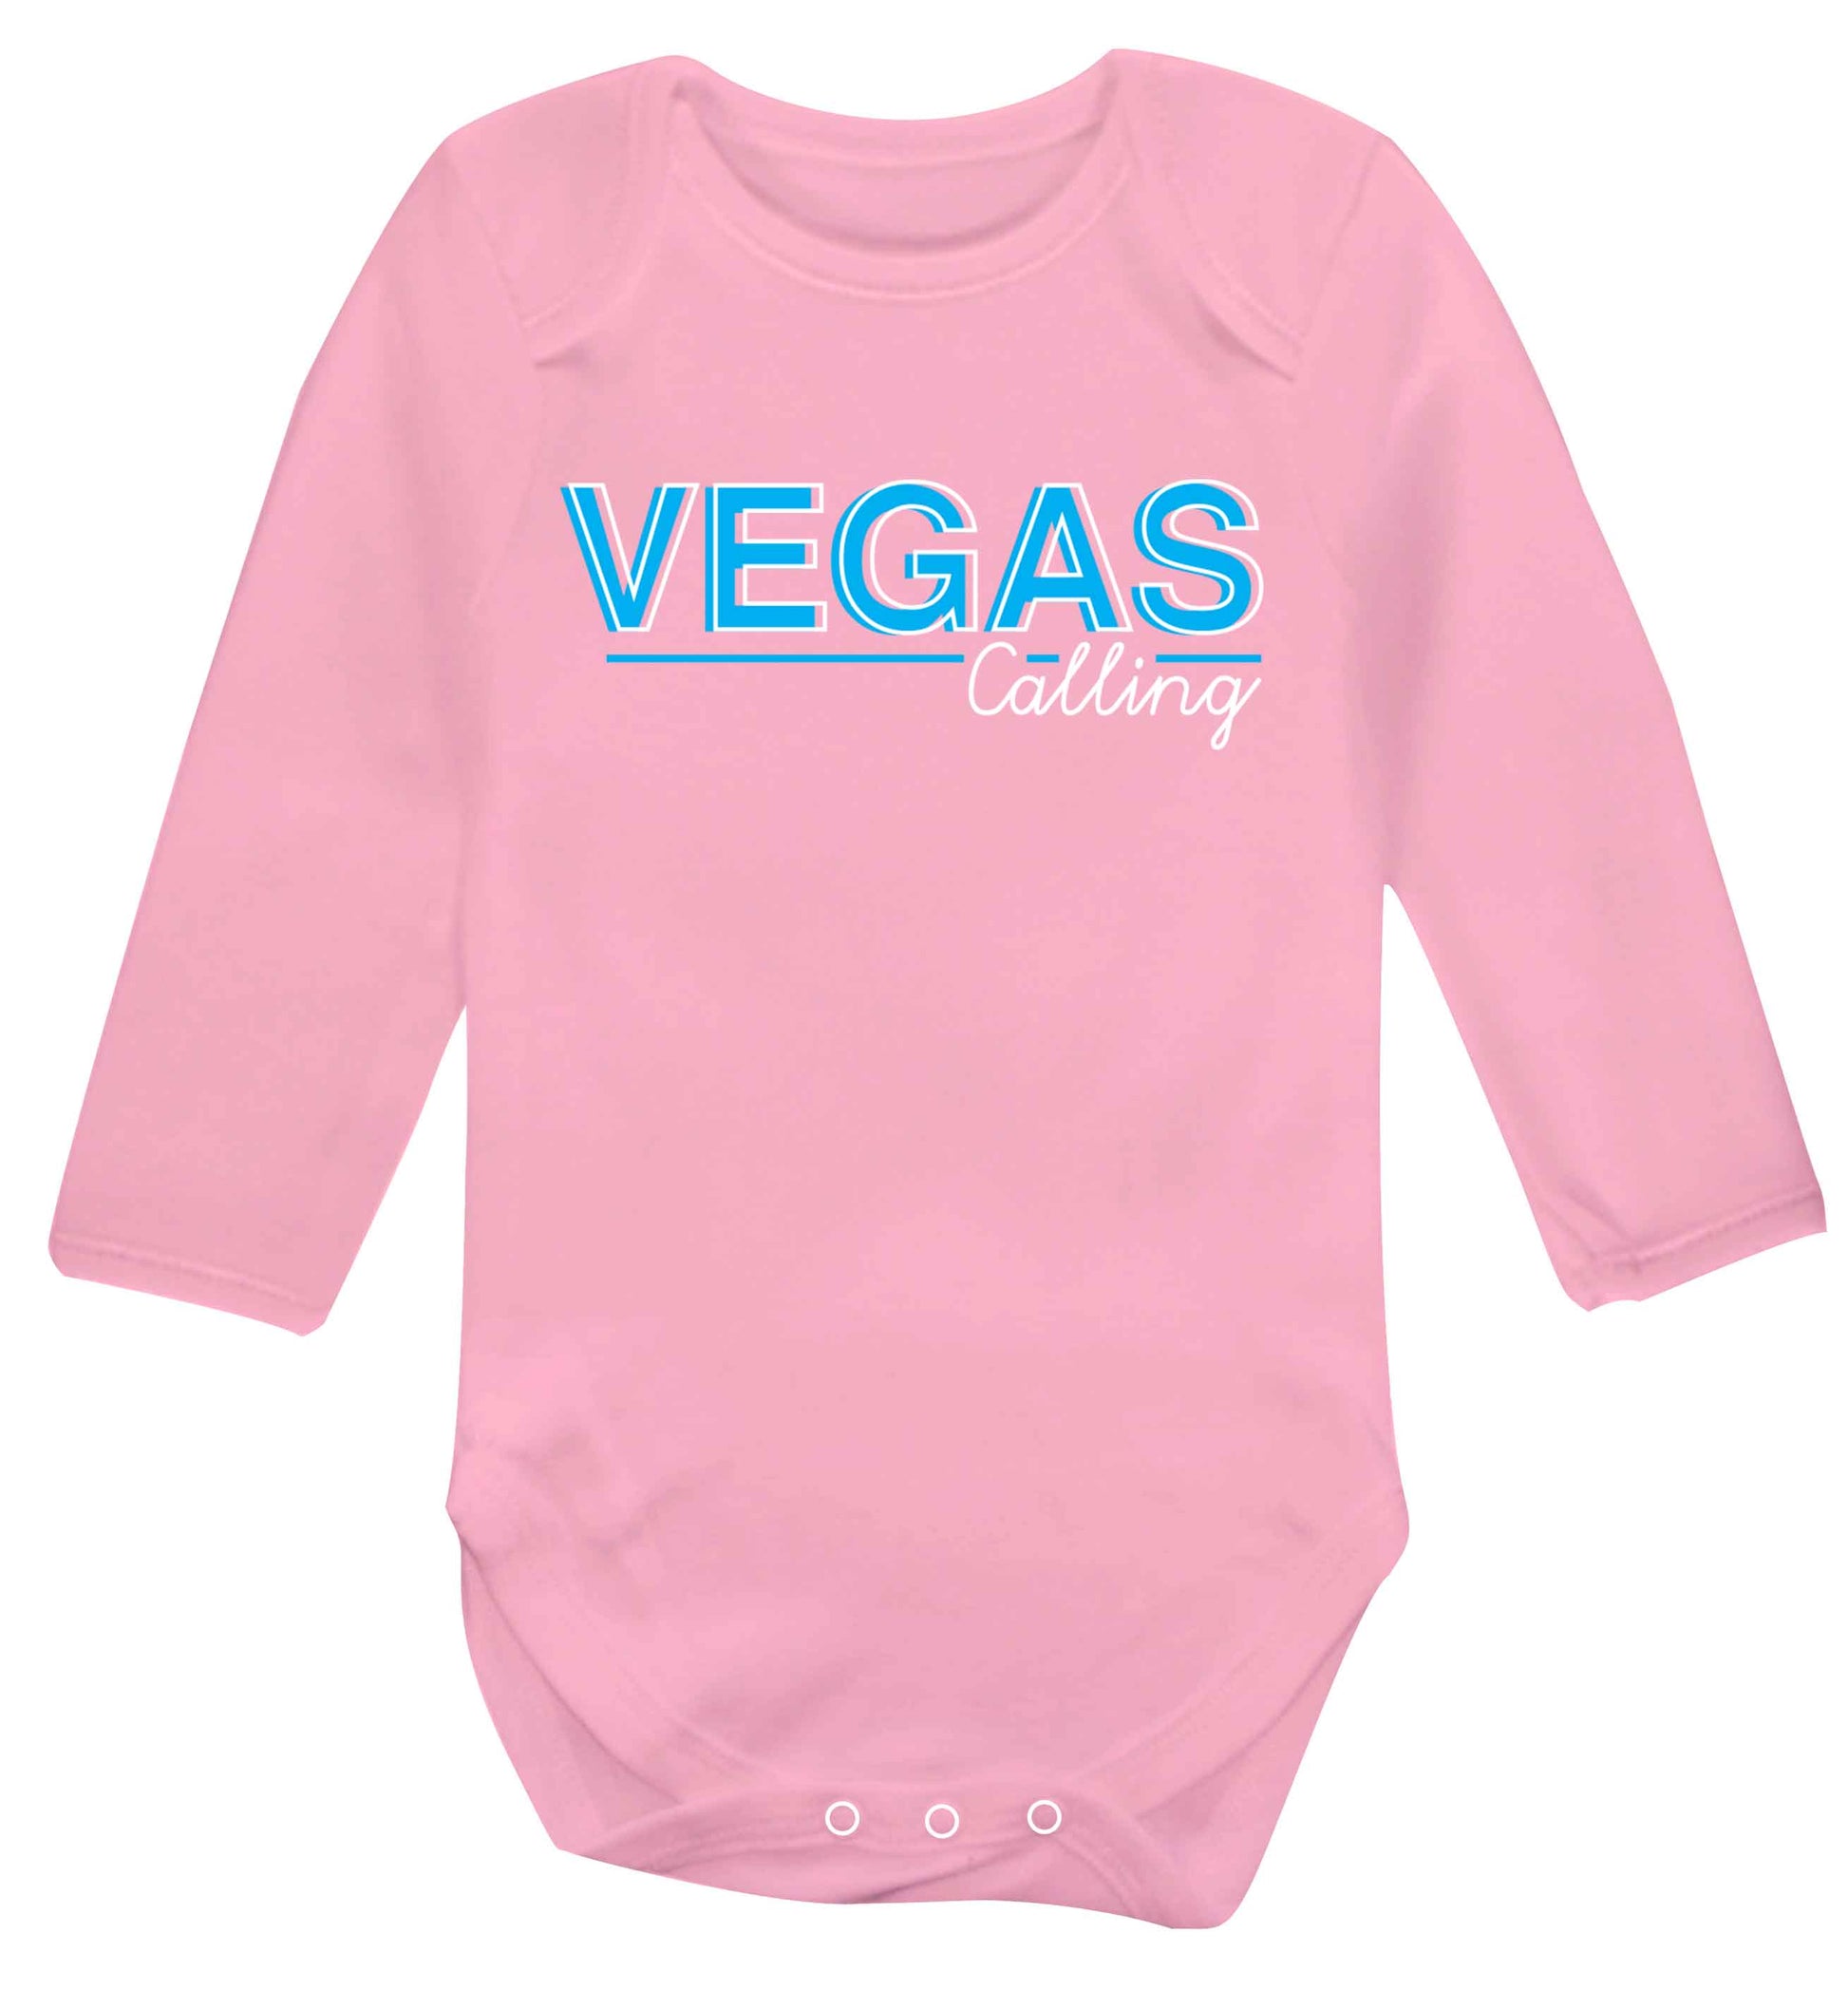 Vegas calling Baby Vest long sleeved pale pink 6-12 months